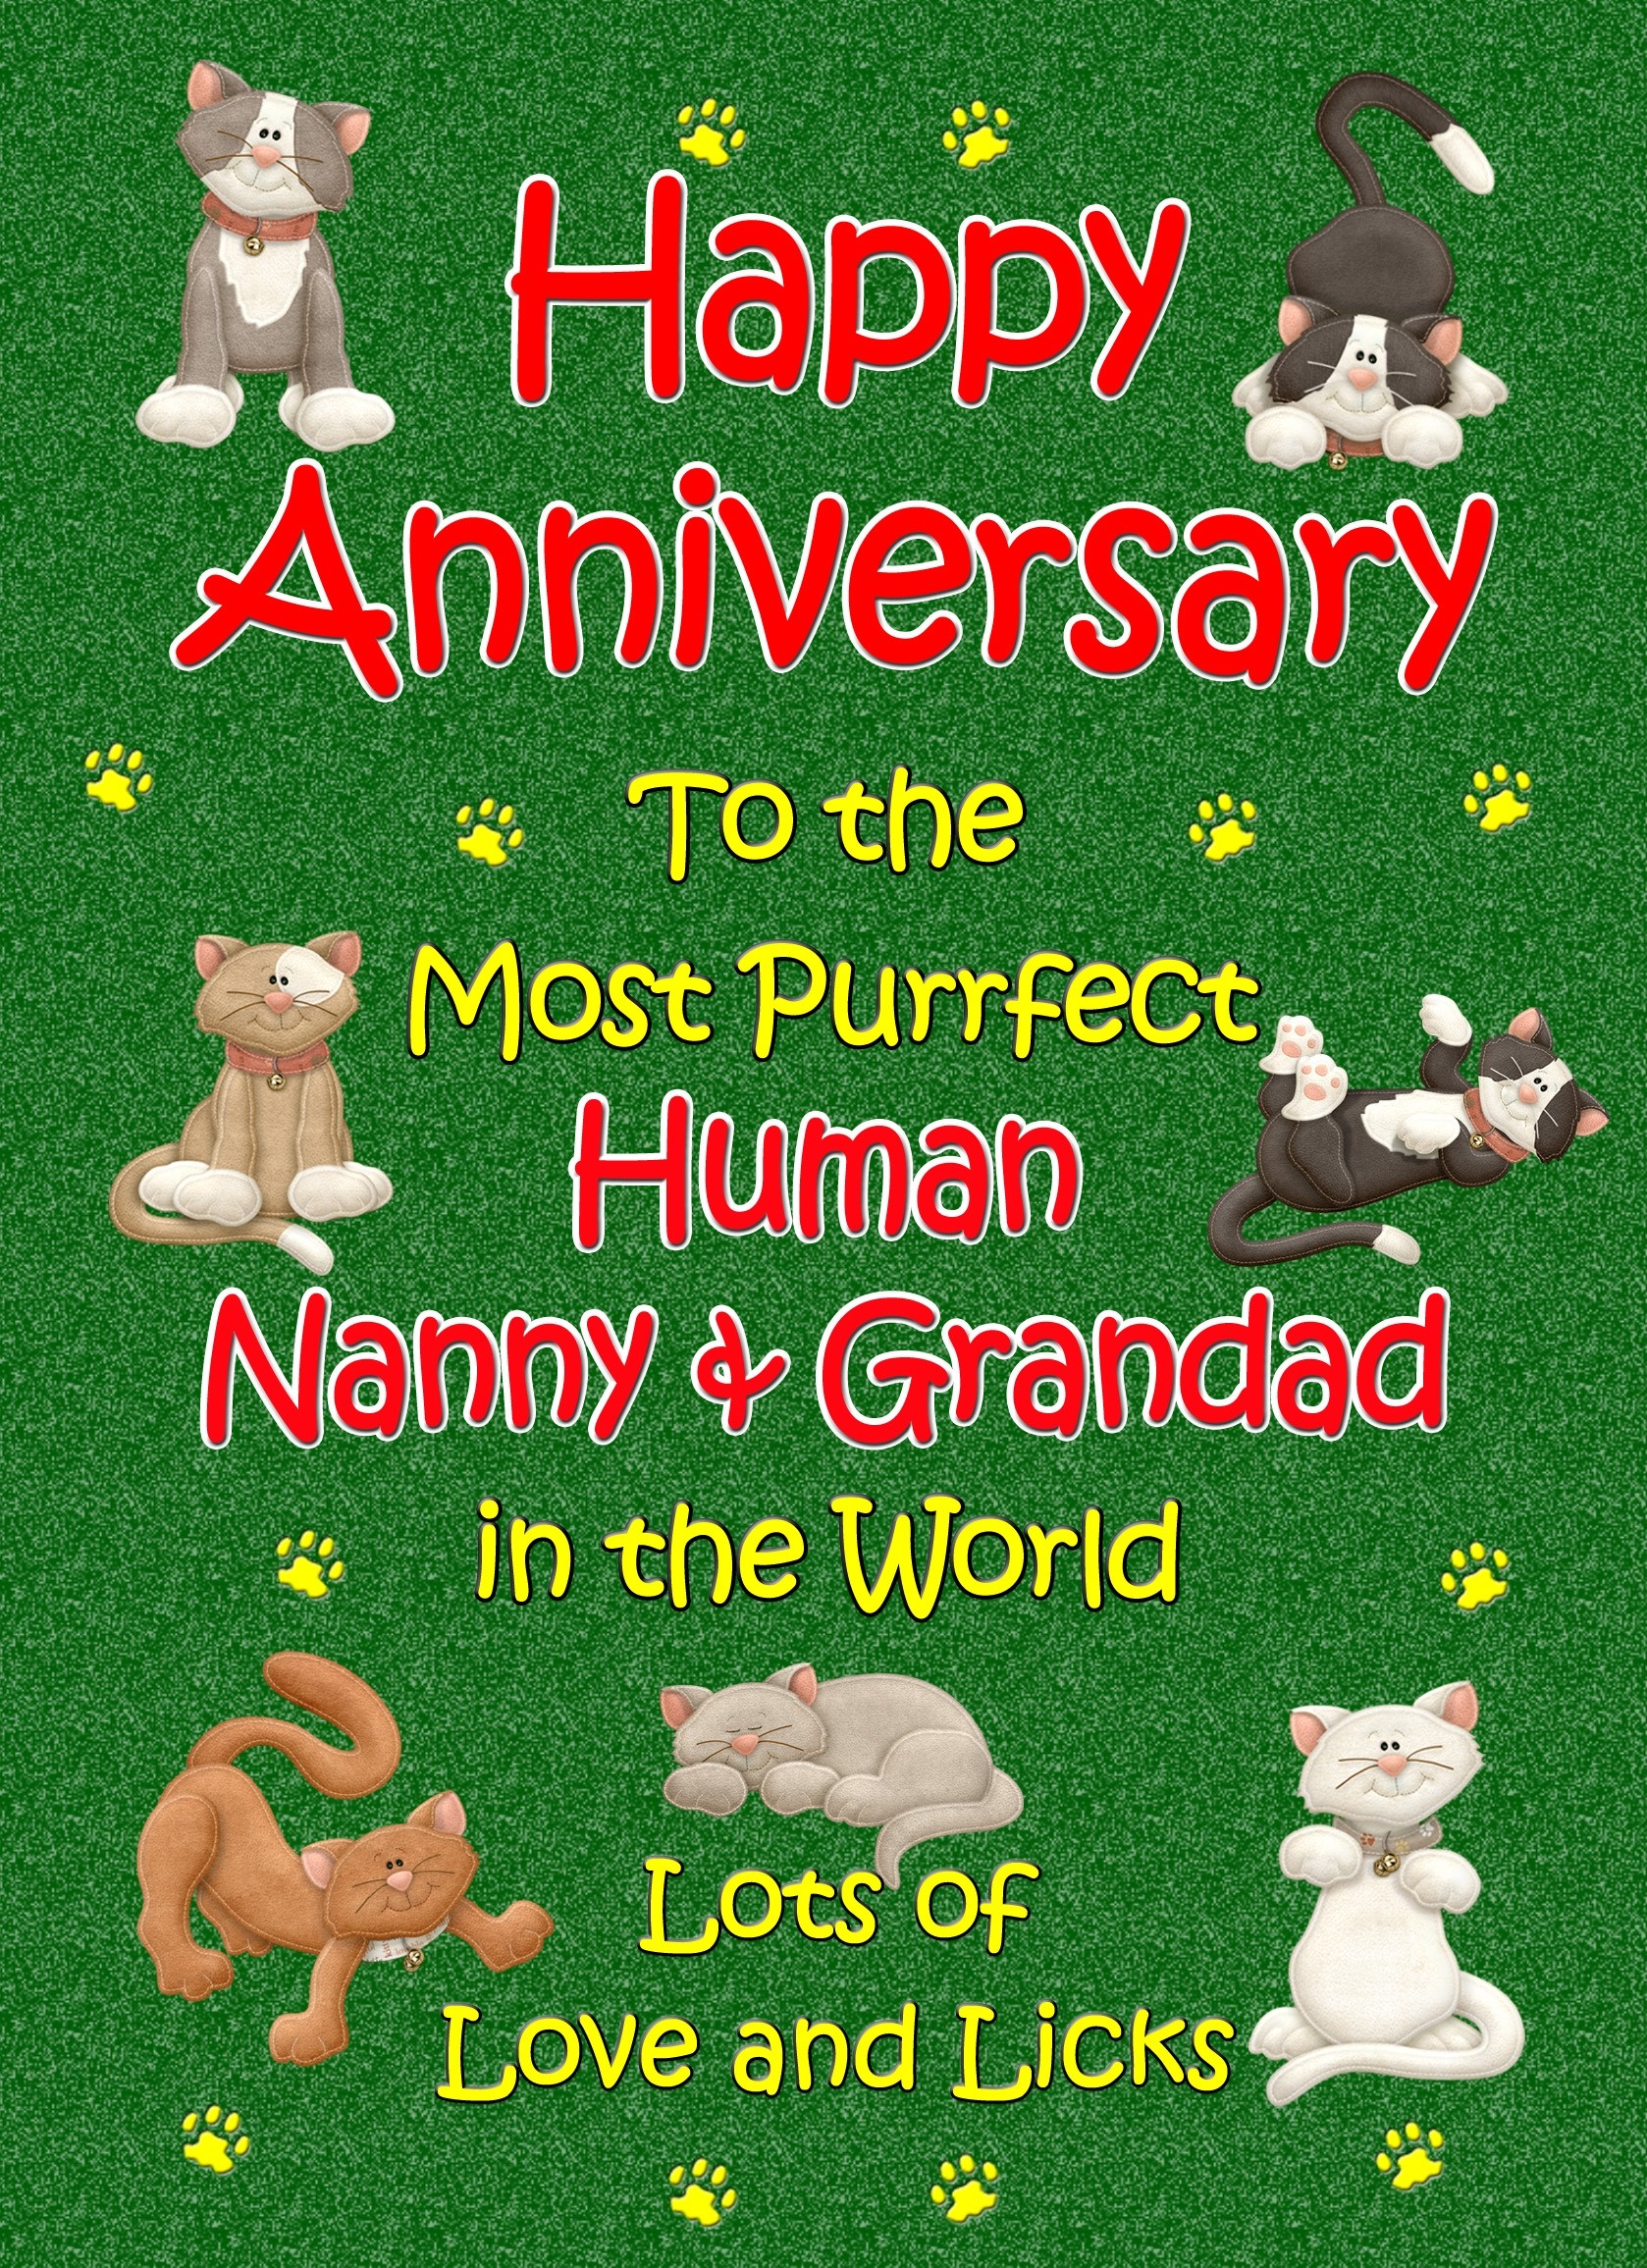 From The Cat Anniversary Card (Purrfect Nanny and Grandad)